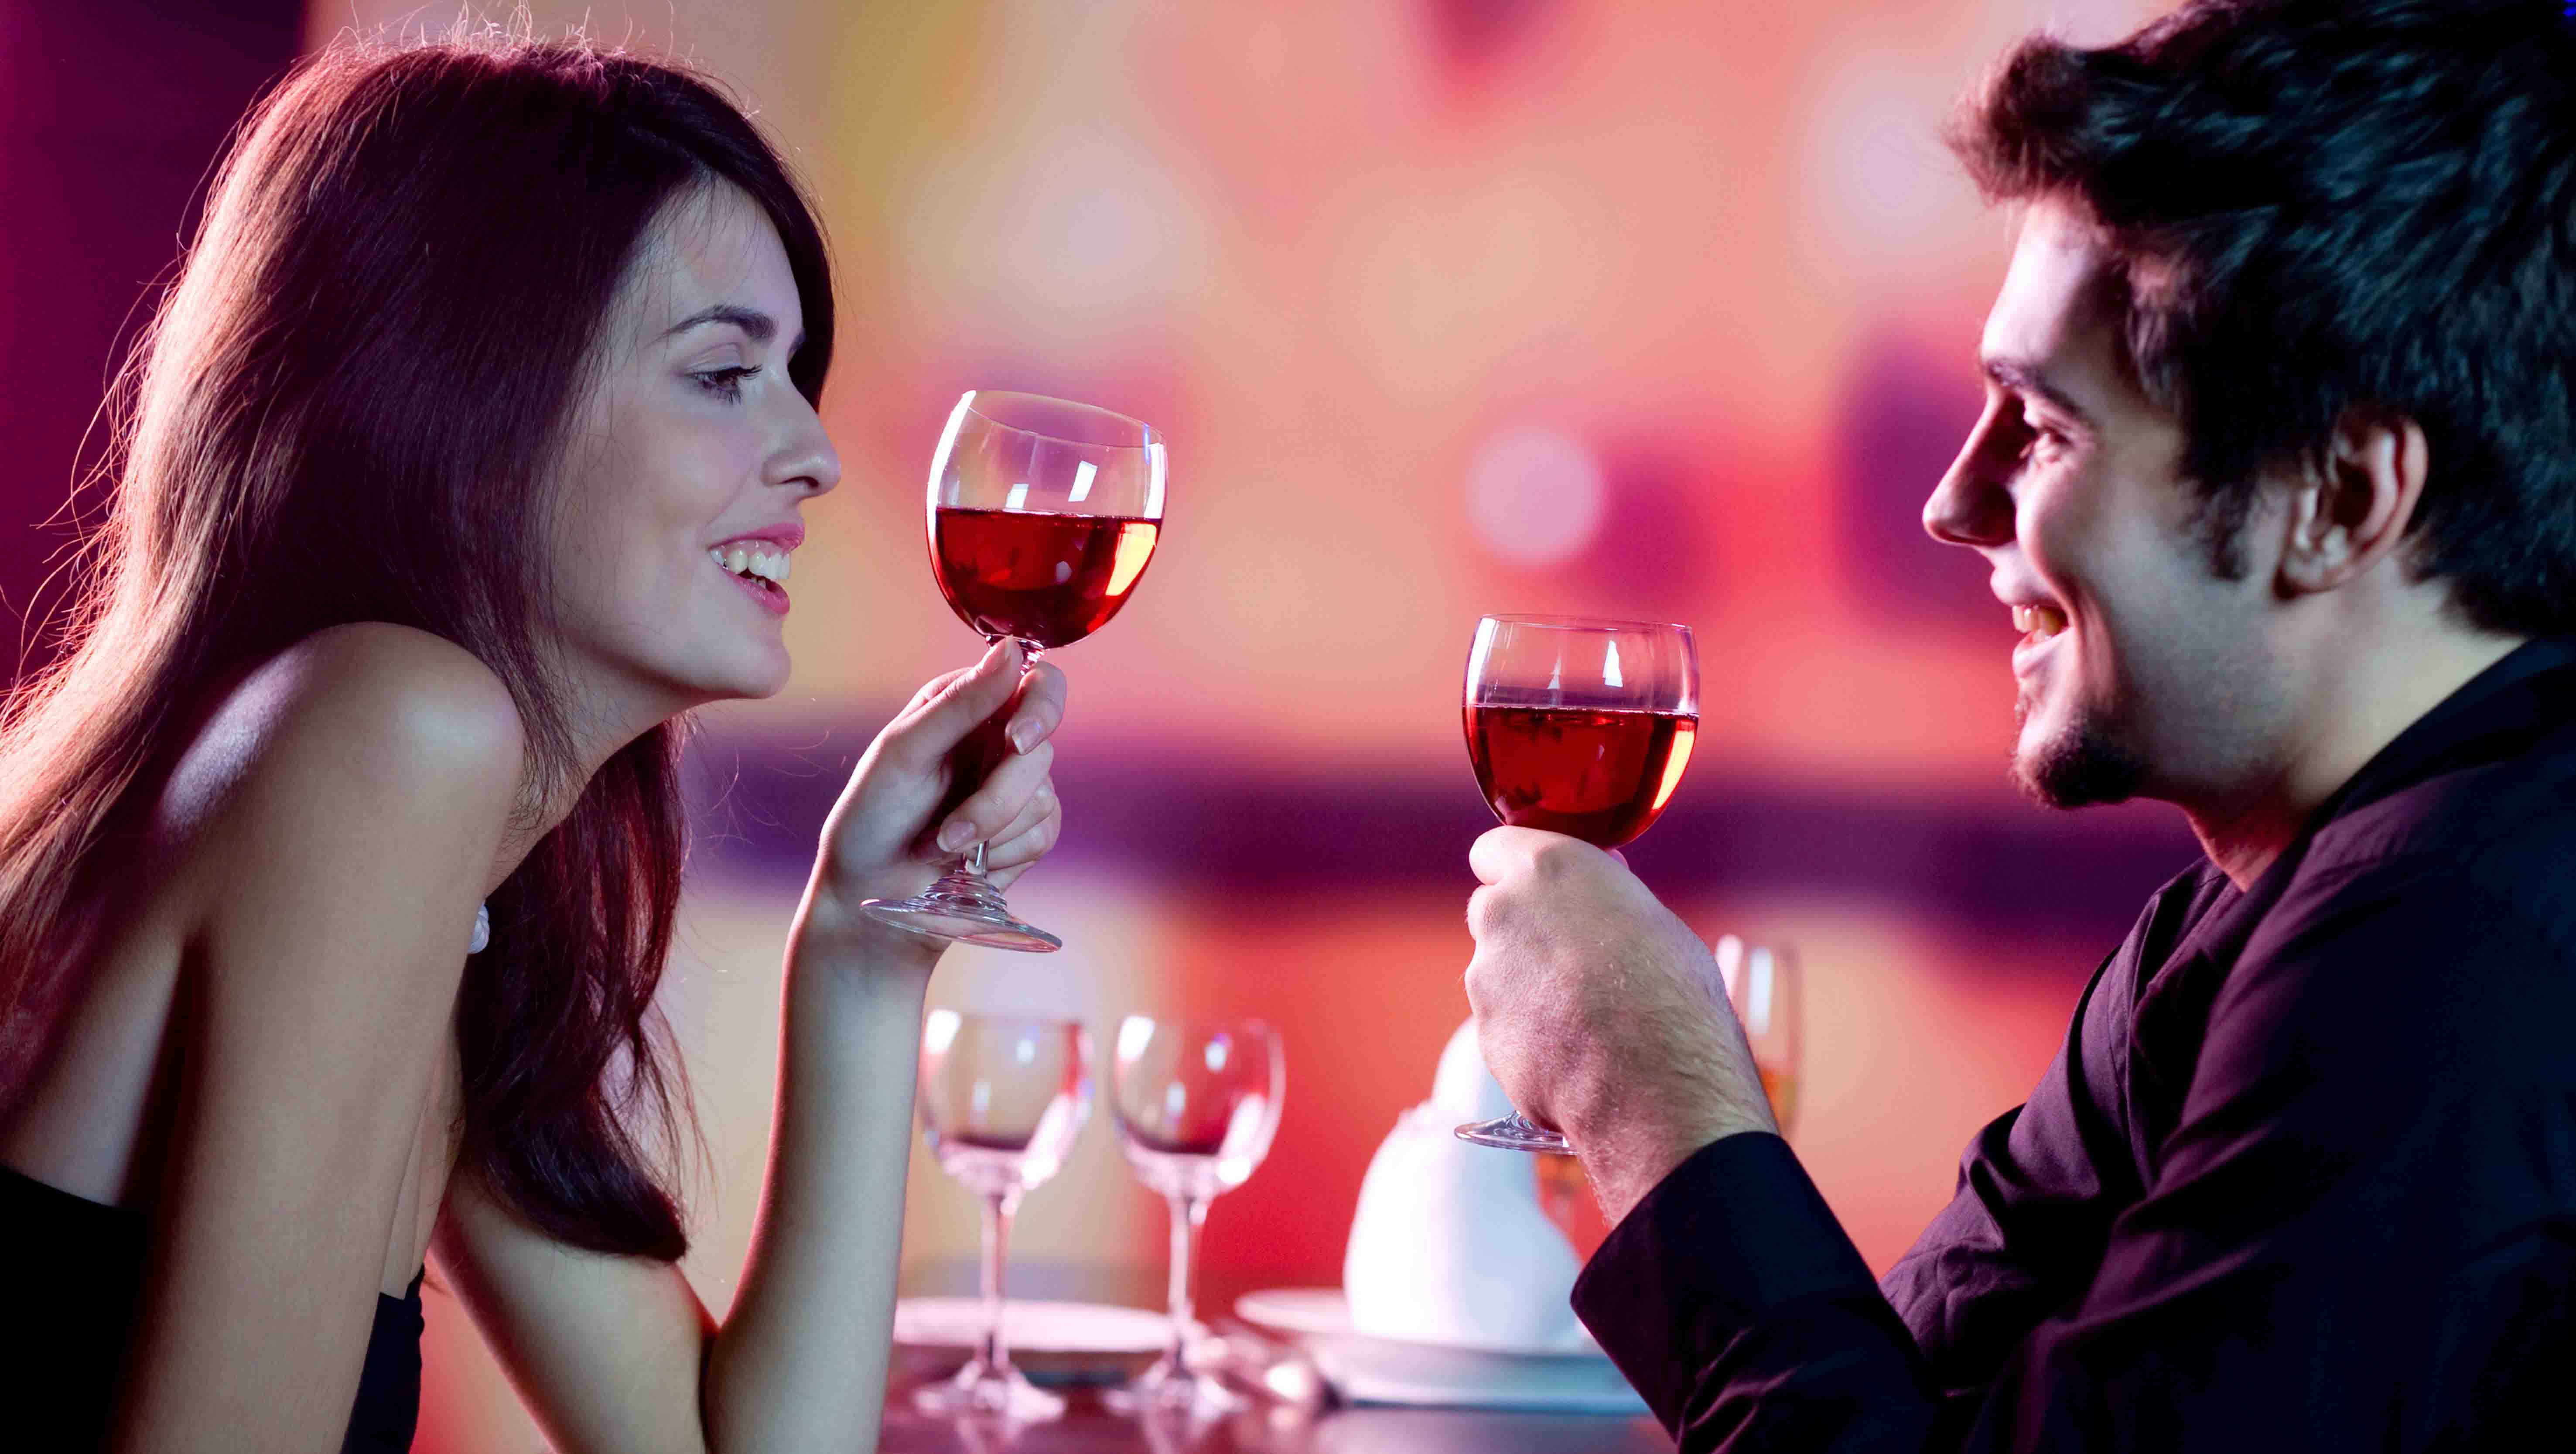 Many area restaurants are offering Valentine's Day dinner for two this coming weekend. (Photo: Orlando Date Night Guide)